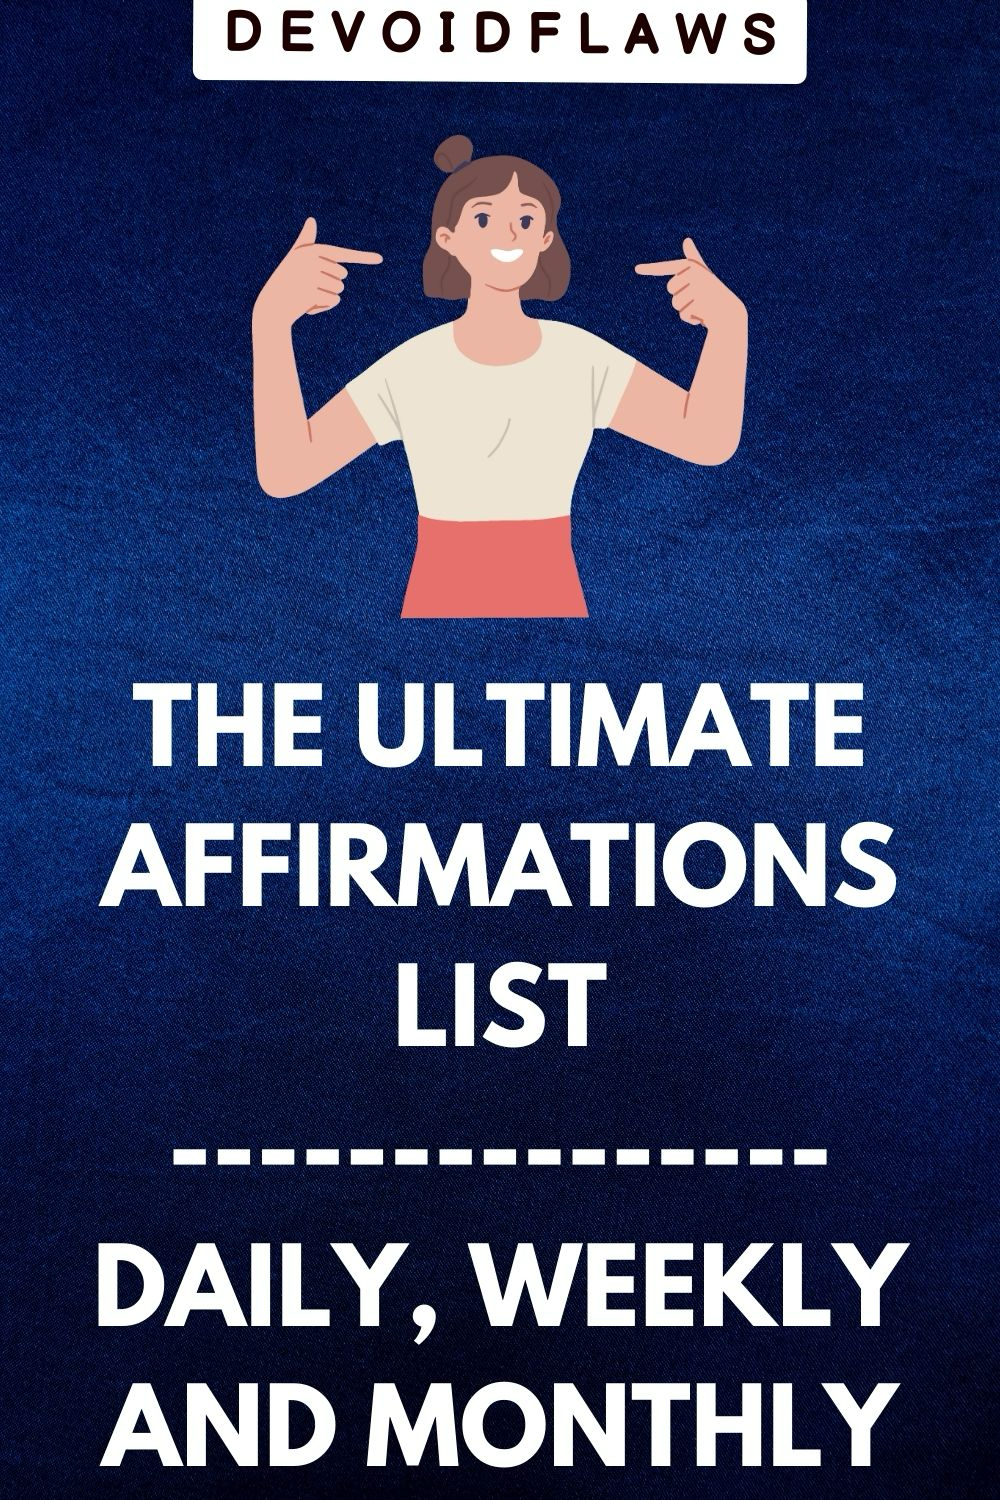 the ultimate affirmations list daily, weekly and monthly